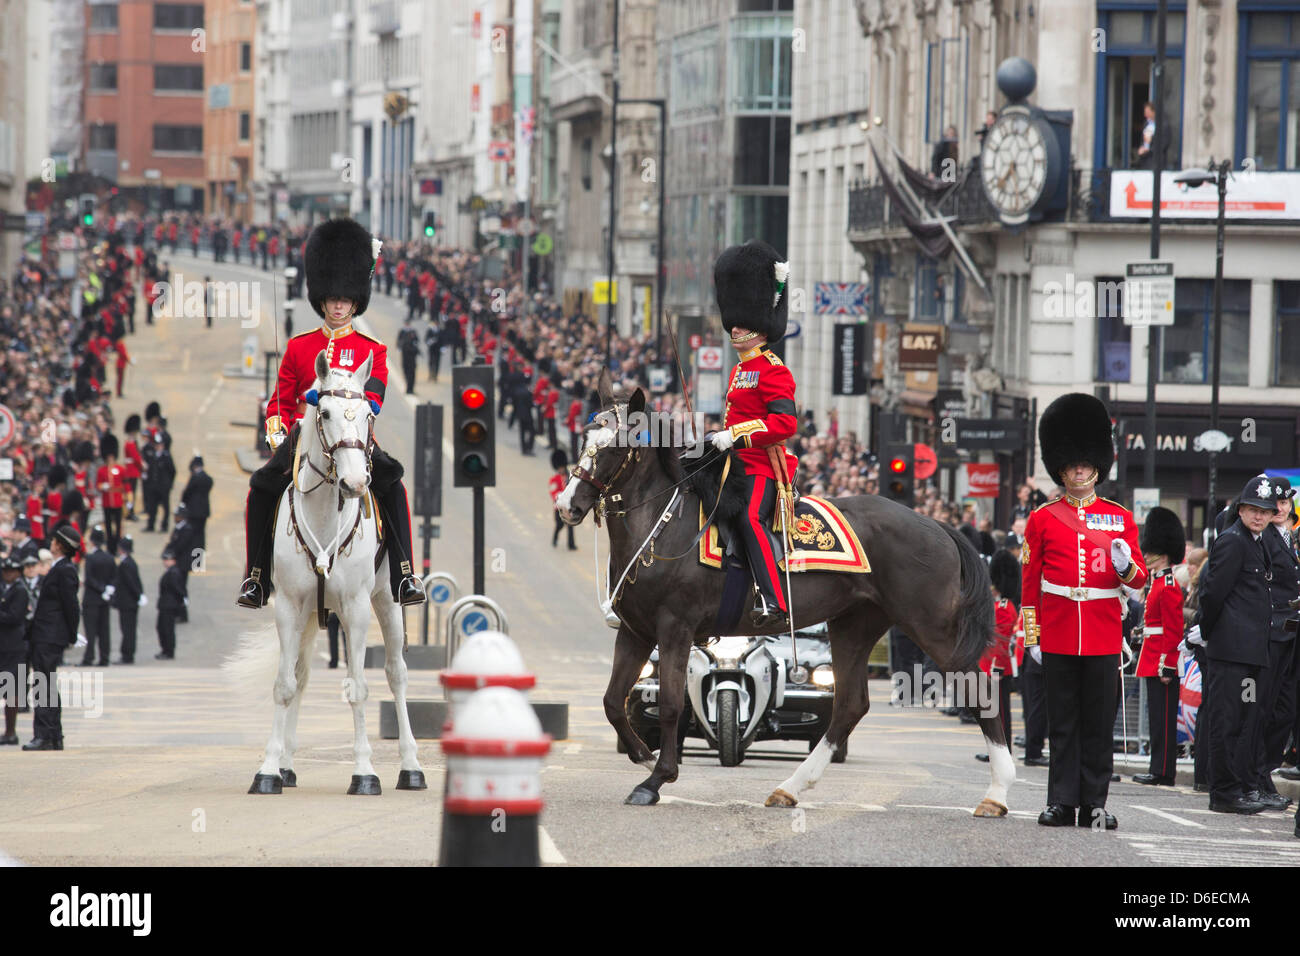 London, UK. Wednesday, 17 April 2013. Horses and hearse in Ludgate Hill Funeral of Baroness Margaret Thatcher at Ludgate Hill, London, UK. Photo: Nick Savage/Alamy Live News Stock Photo